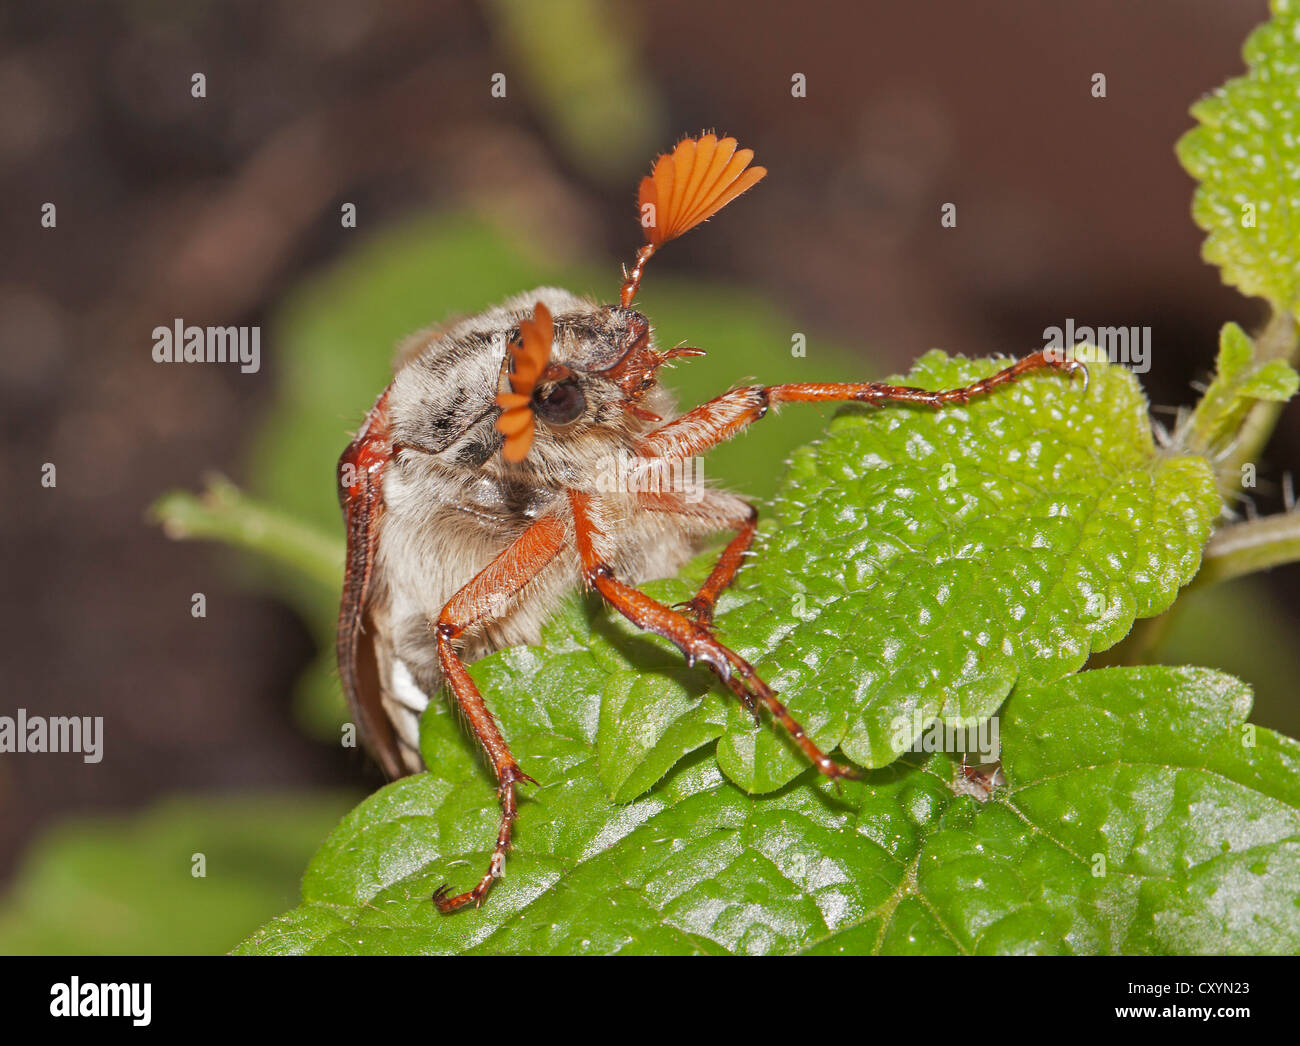 European Cockchafer (Melolontha melolontha) with raised antennae Stock Photo